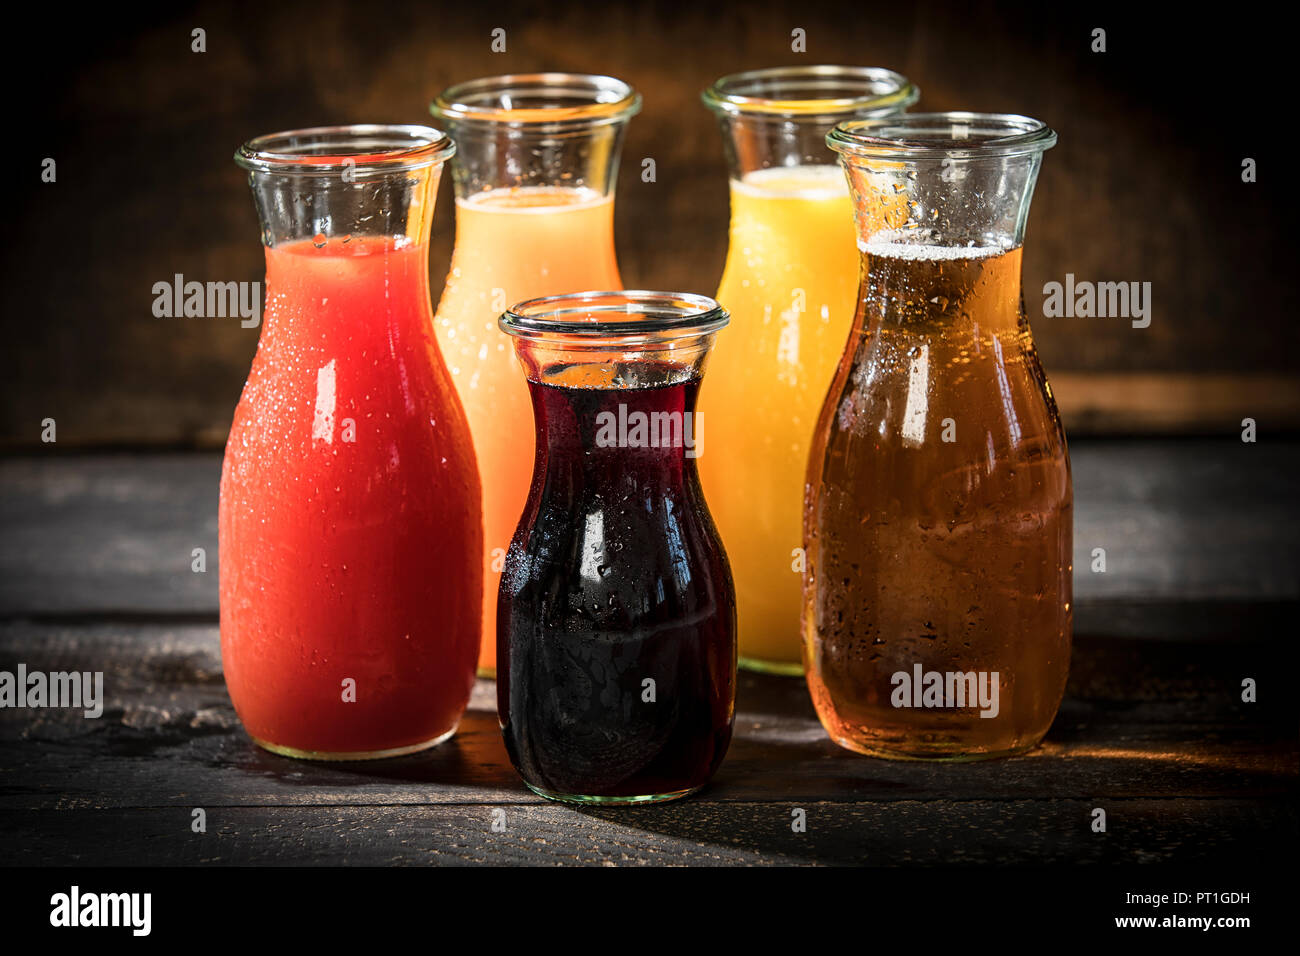 Glass bottles of various fruit juices Stock Photo